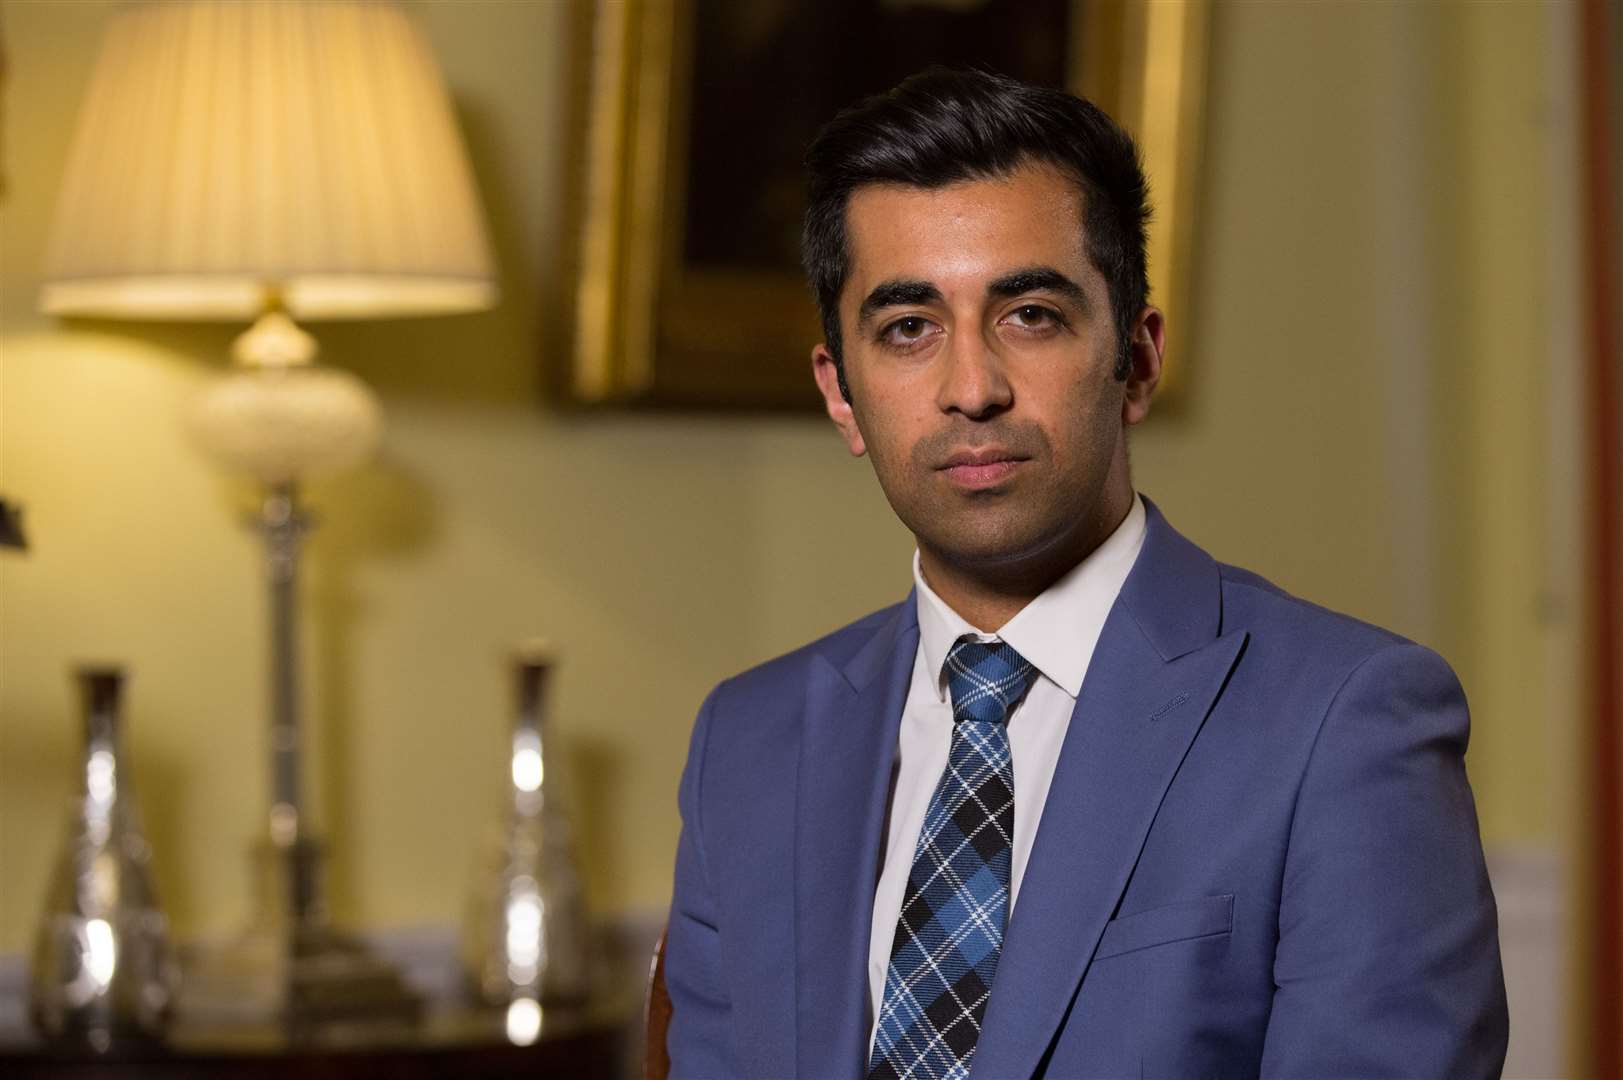 Health secretary Humza Yousaf has announced that second dose of vaccines for children aged 12 to 15 has been brought forward.